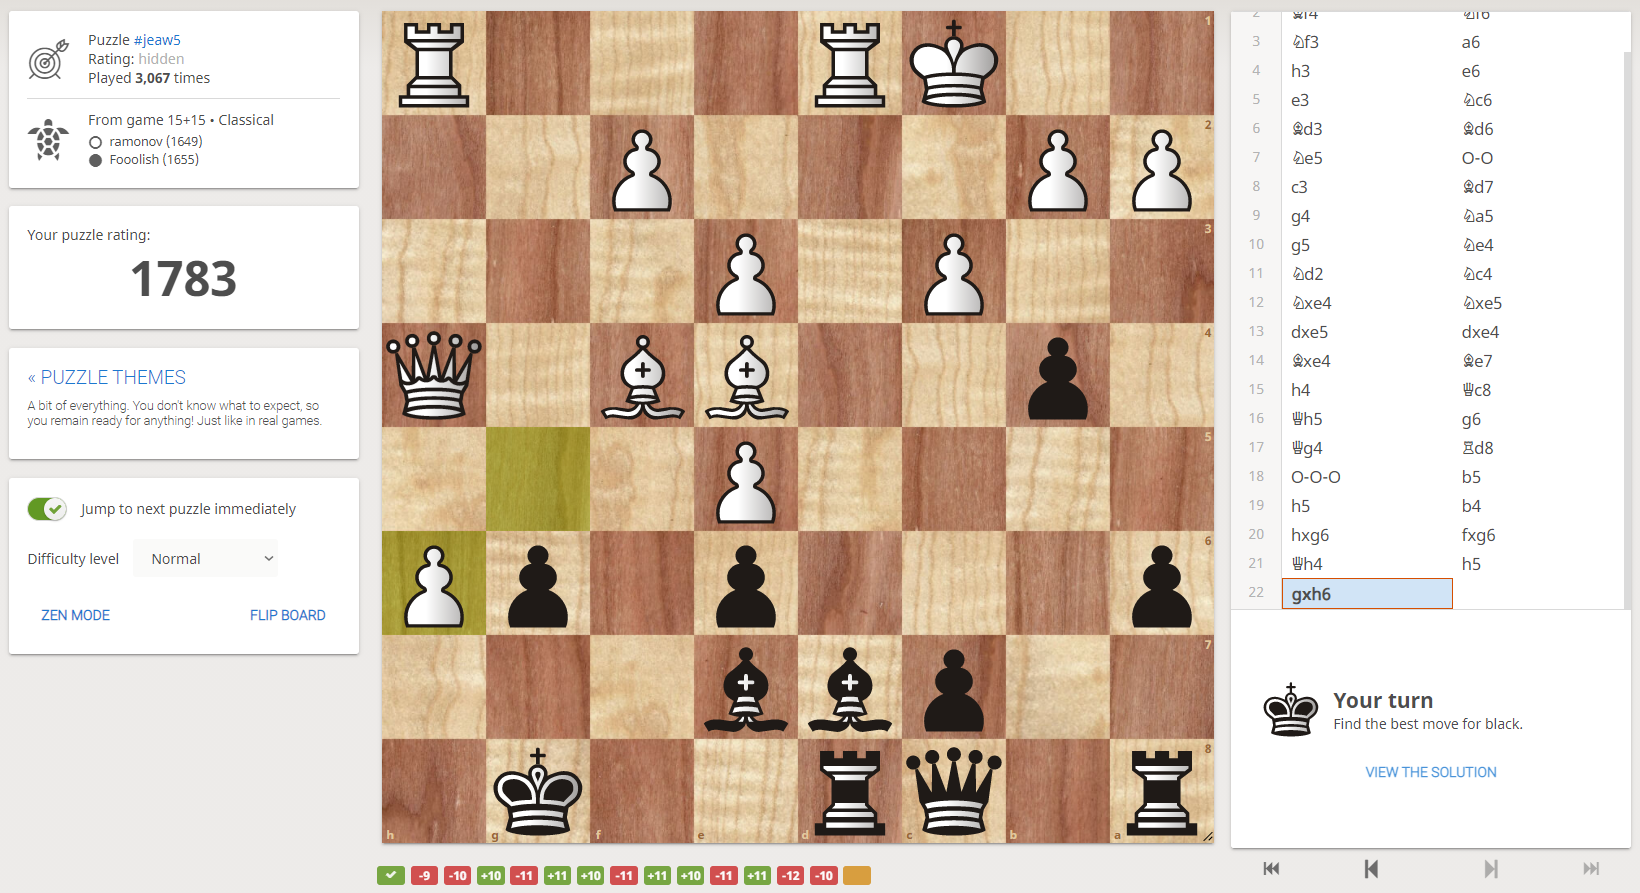 lichess.org - To adjust the board size, click your